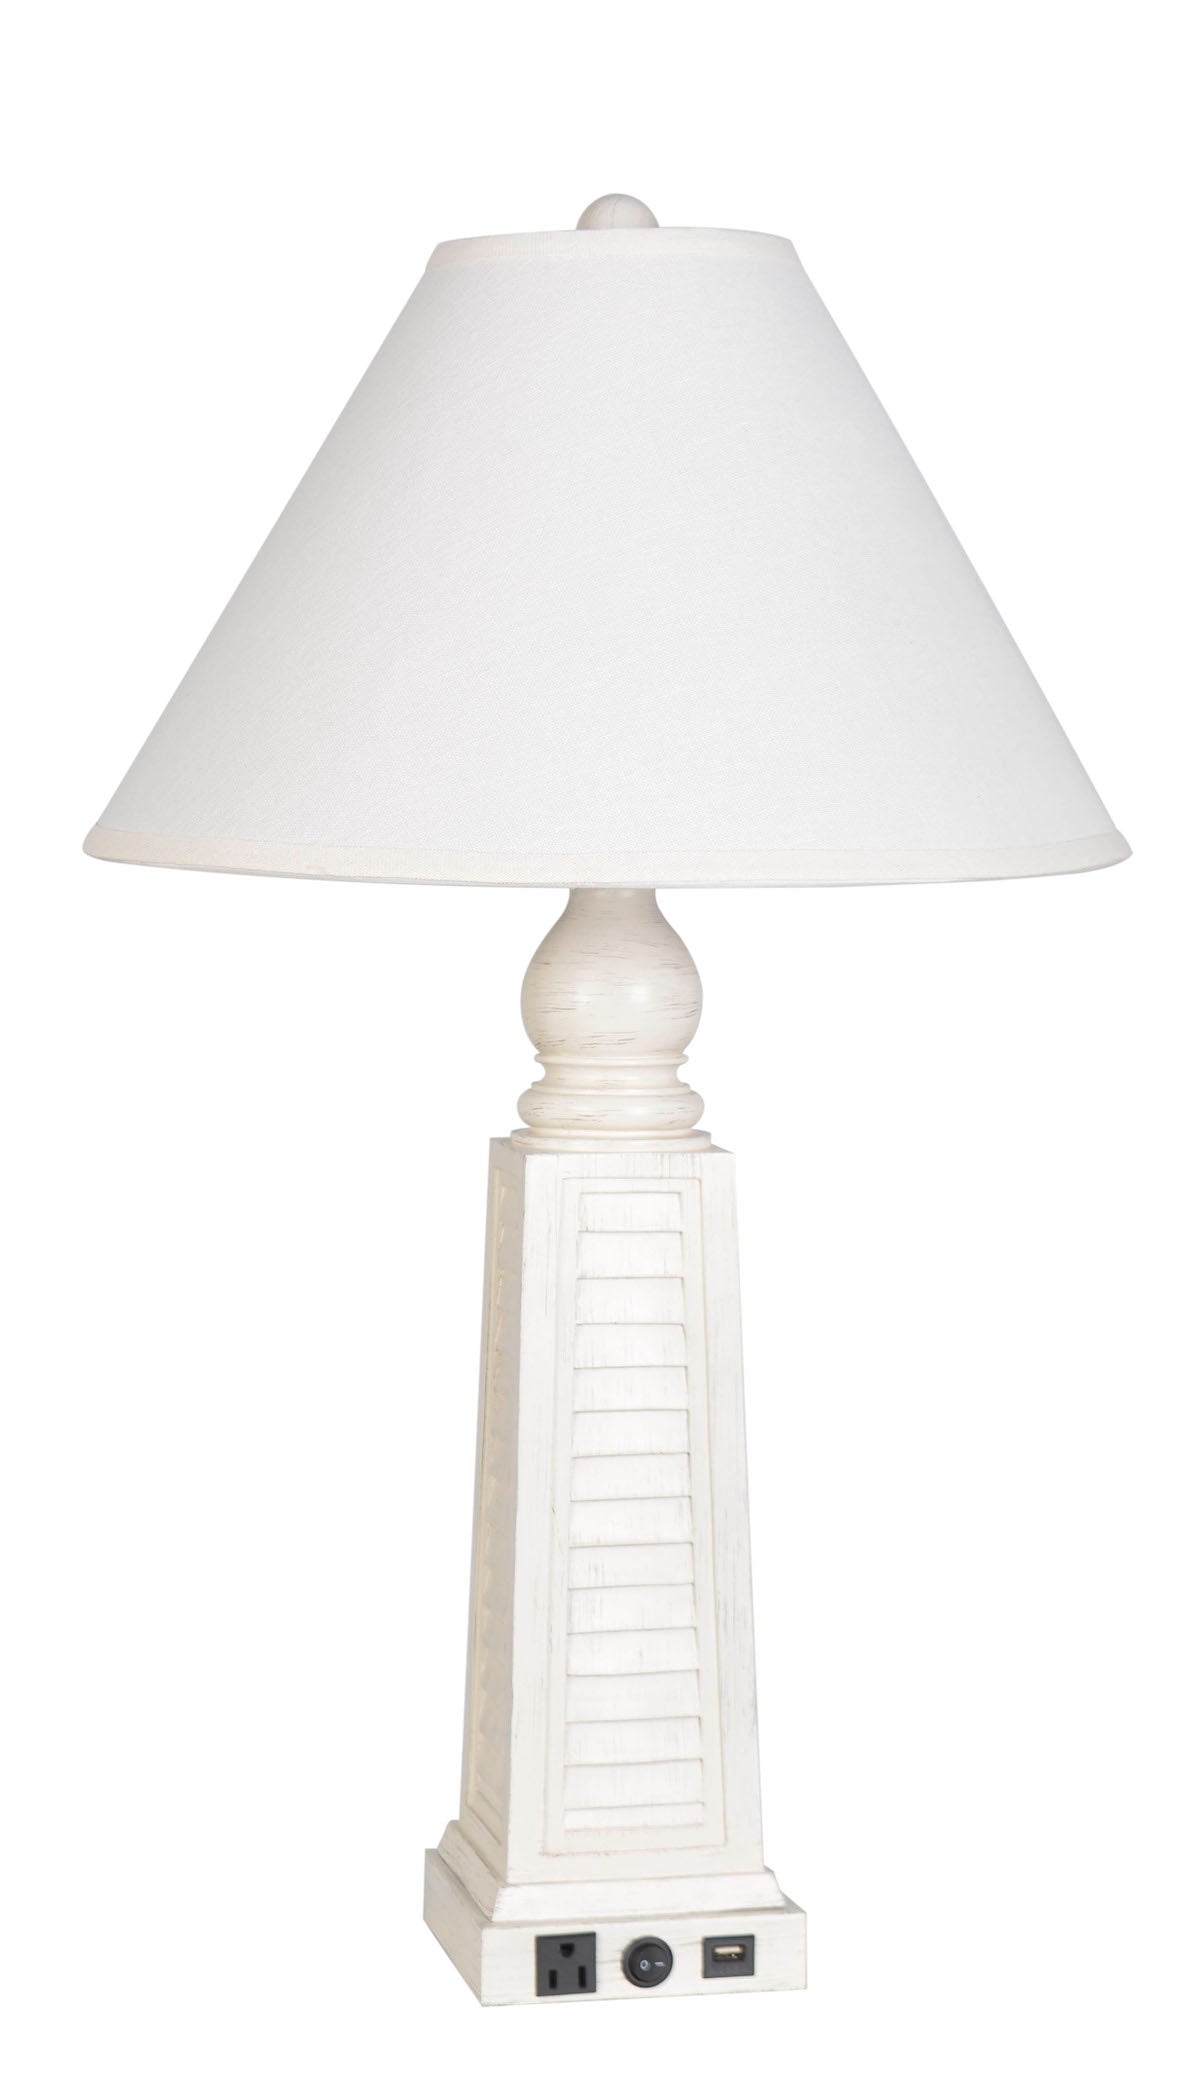 White Shutter Table Lamp with USB